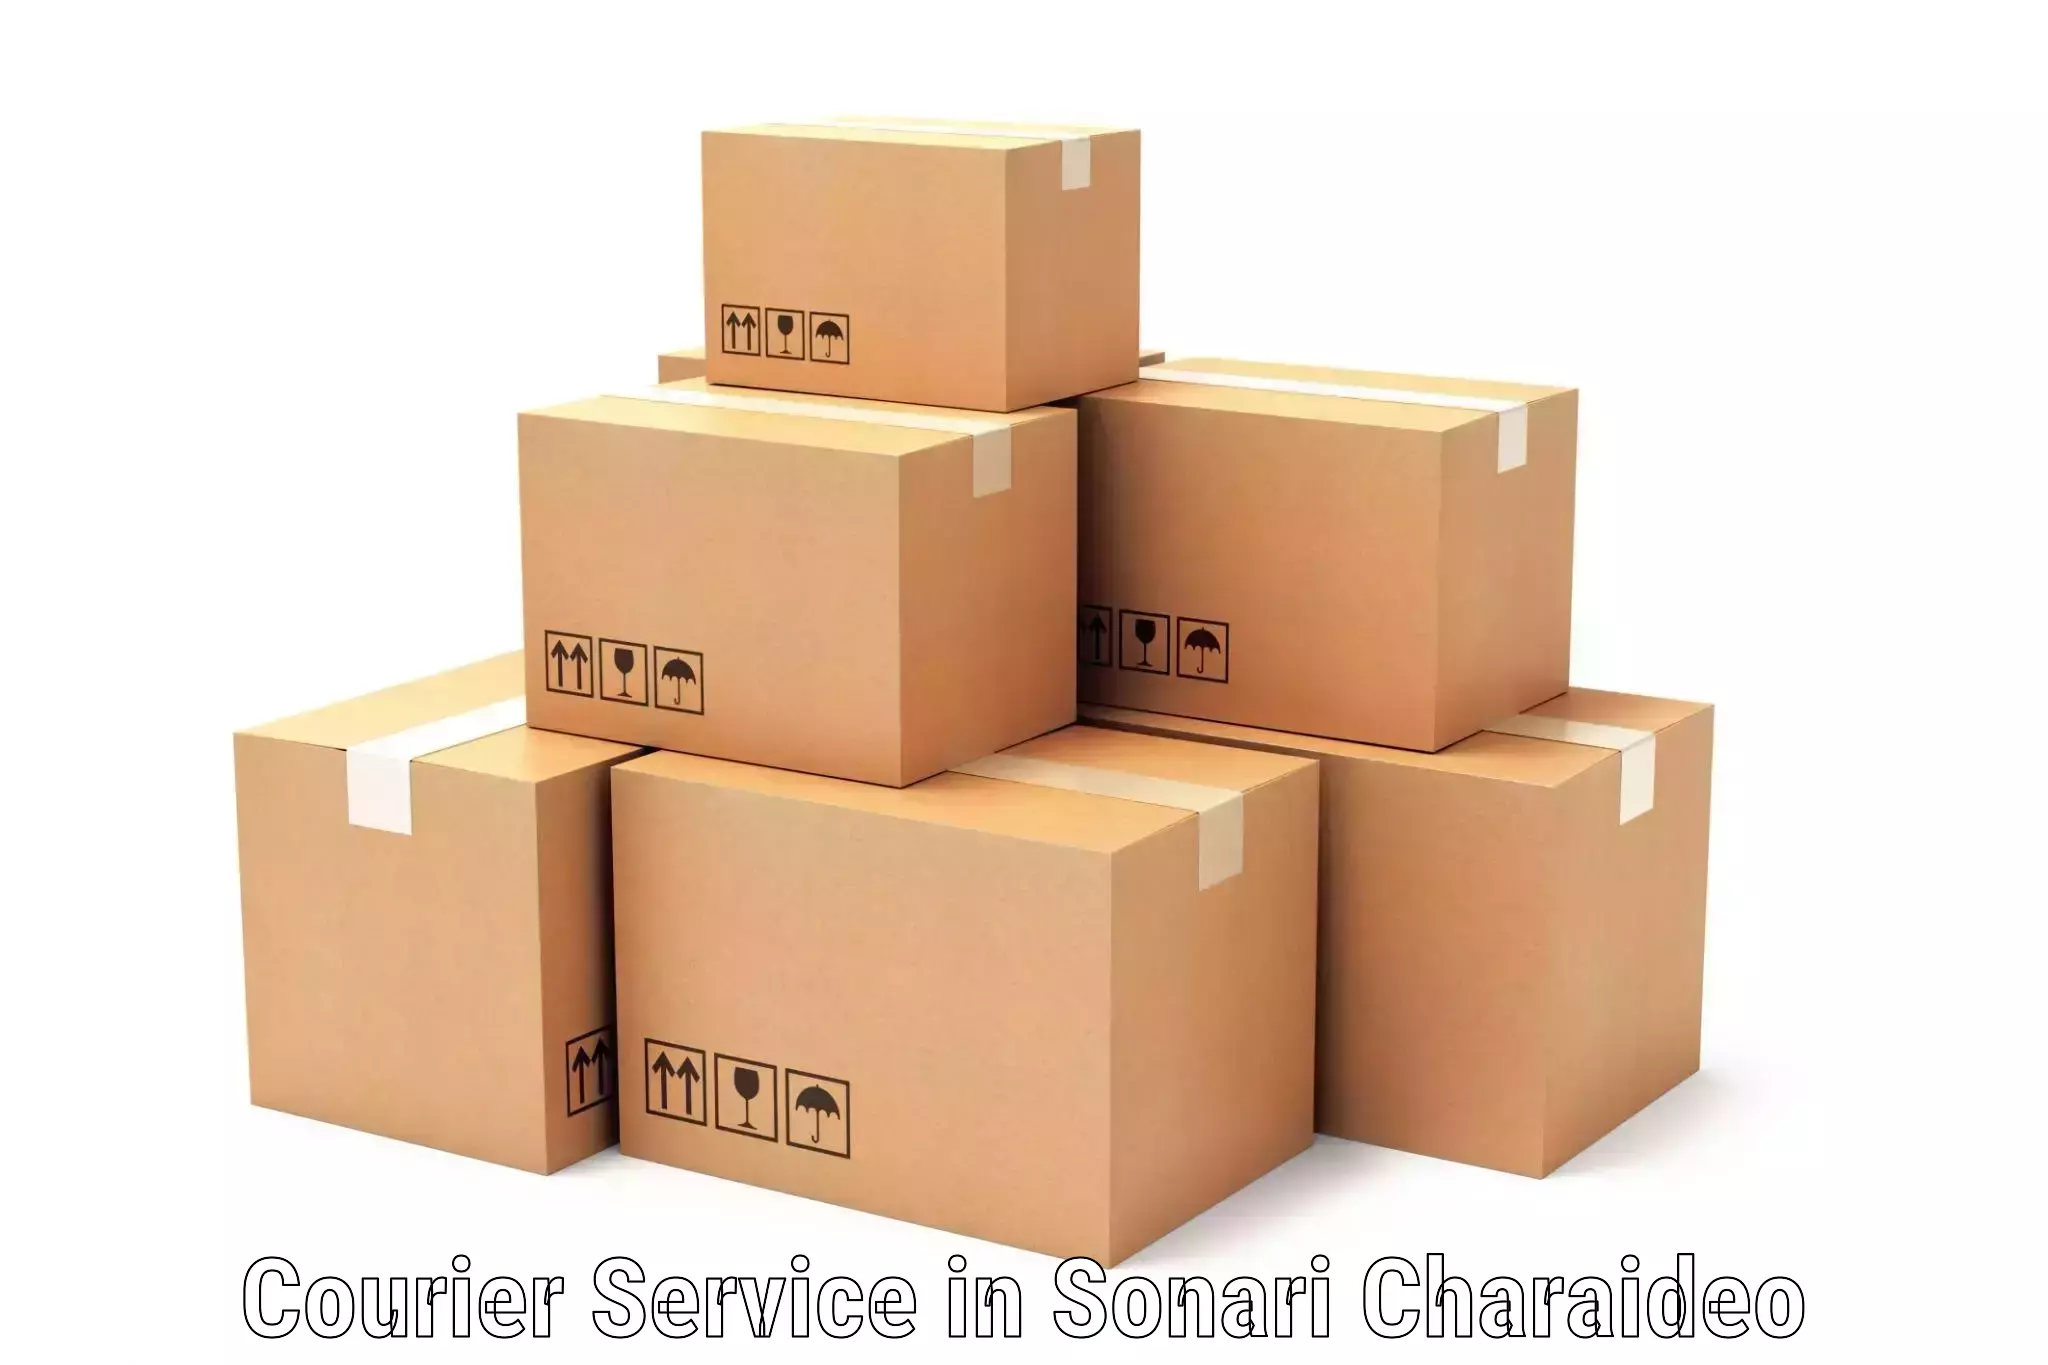 Express courier capabilities in Sonari Charaideo